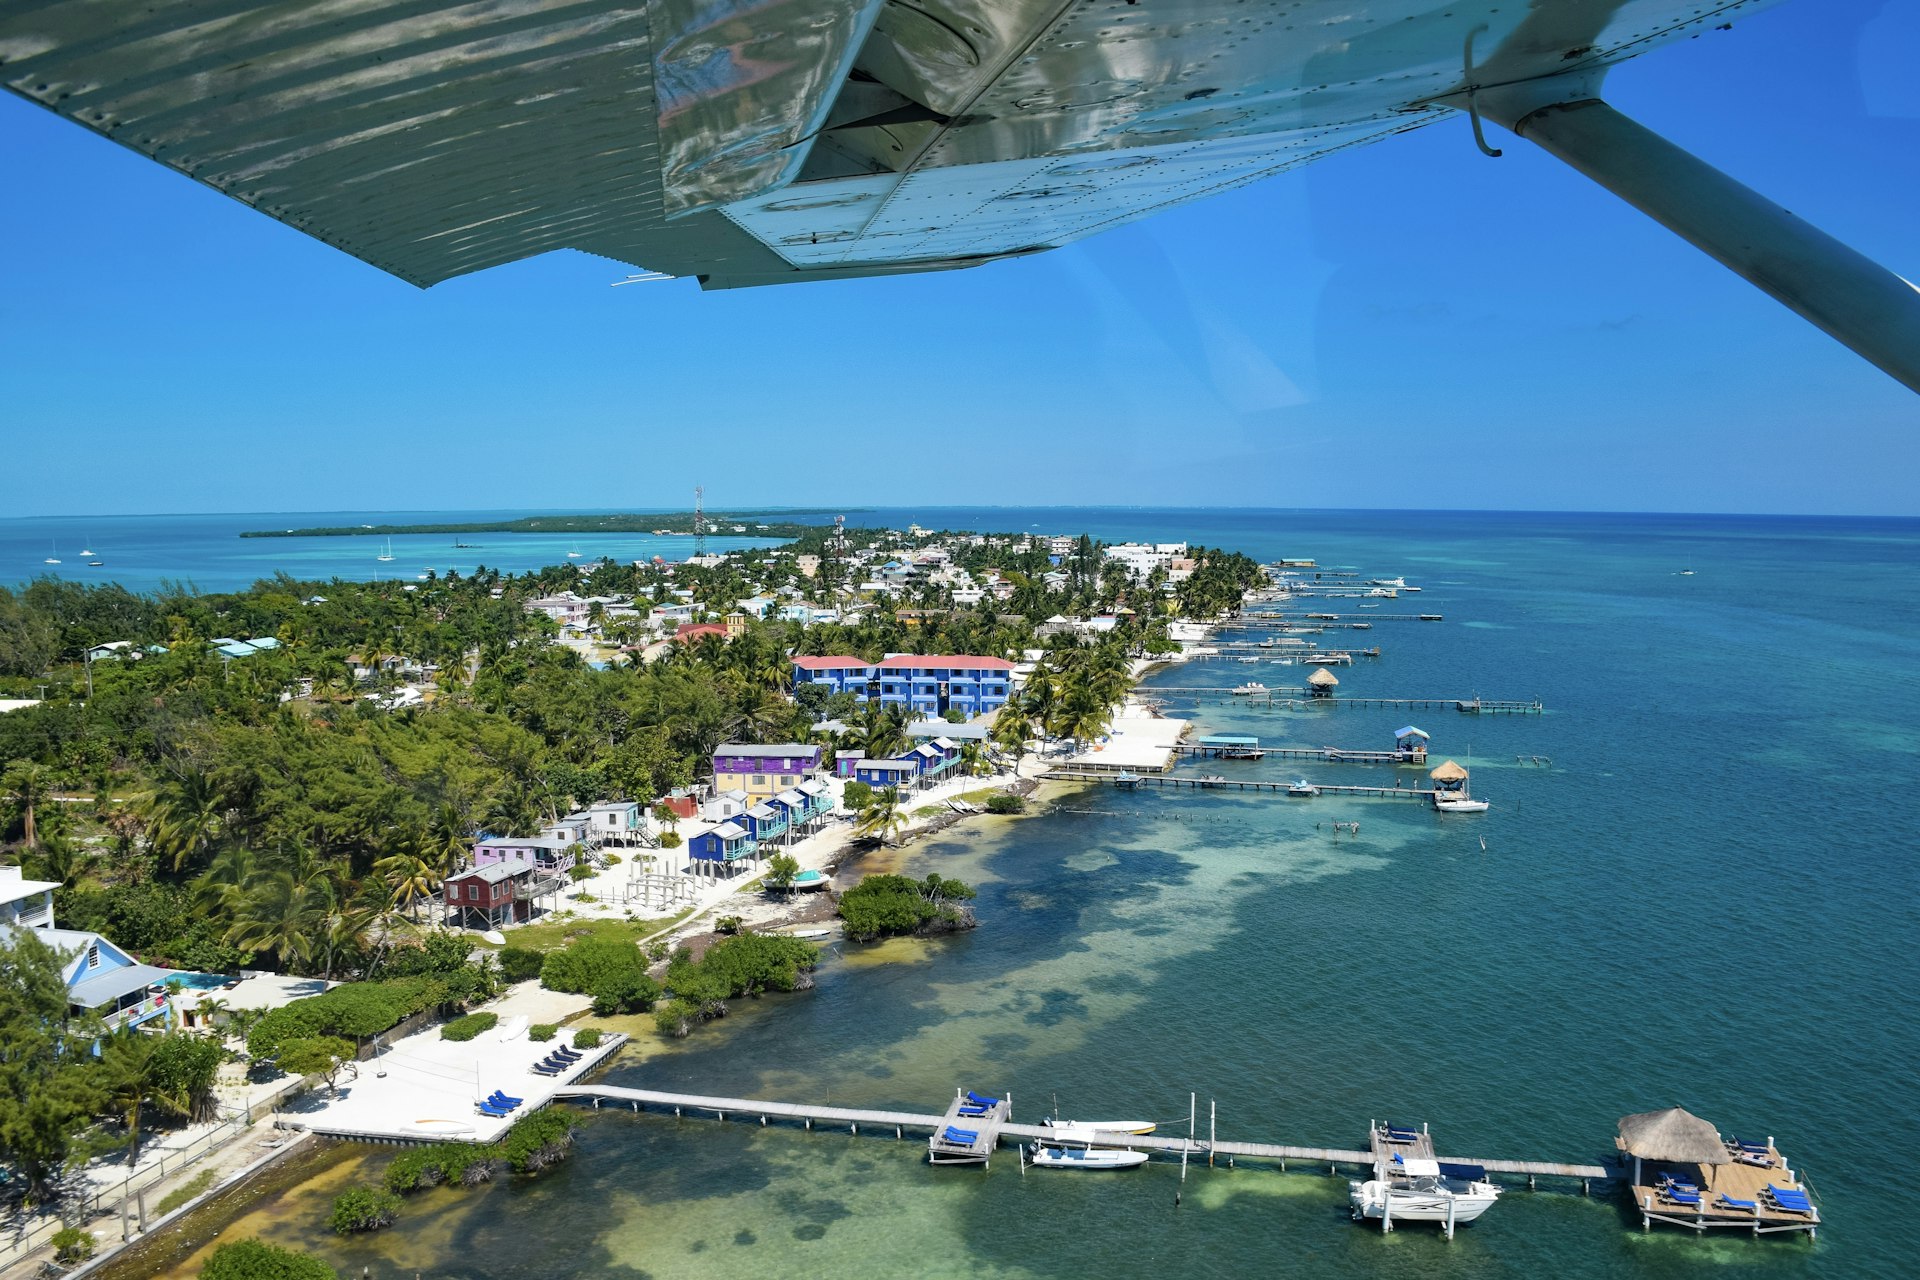 Caye Caulker from above with plane wing in foreground